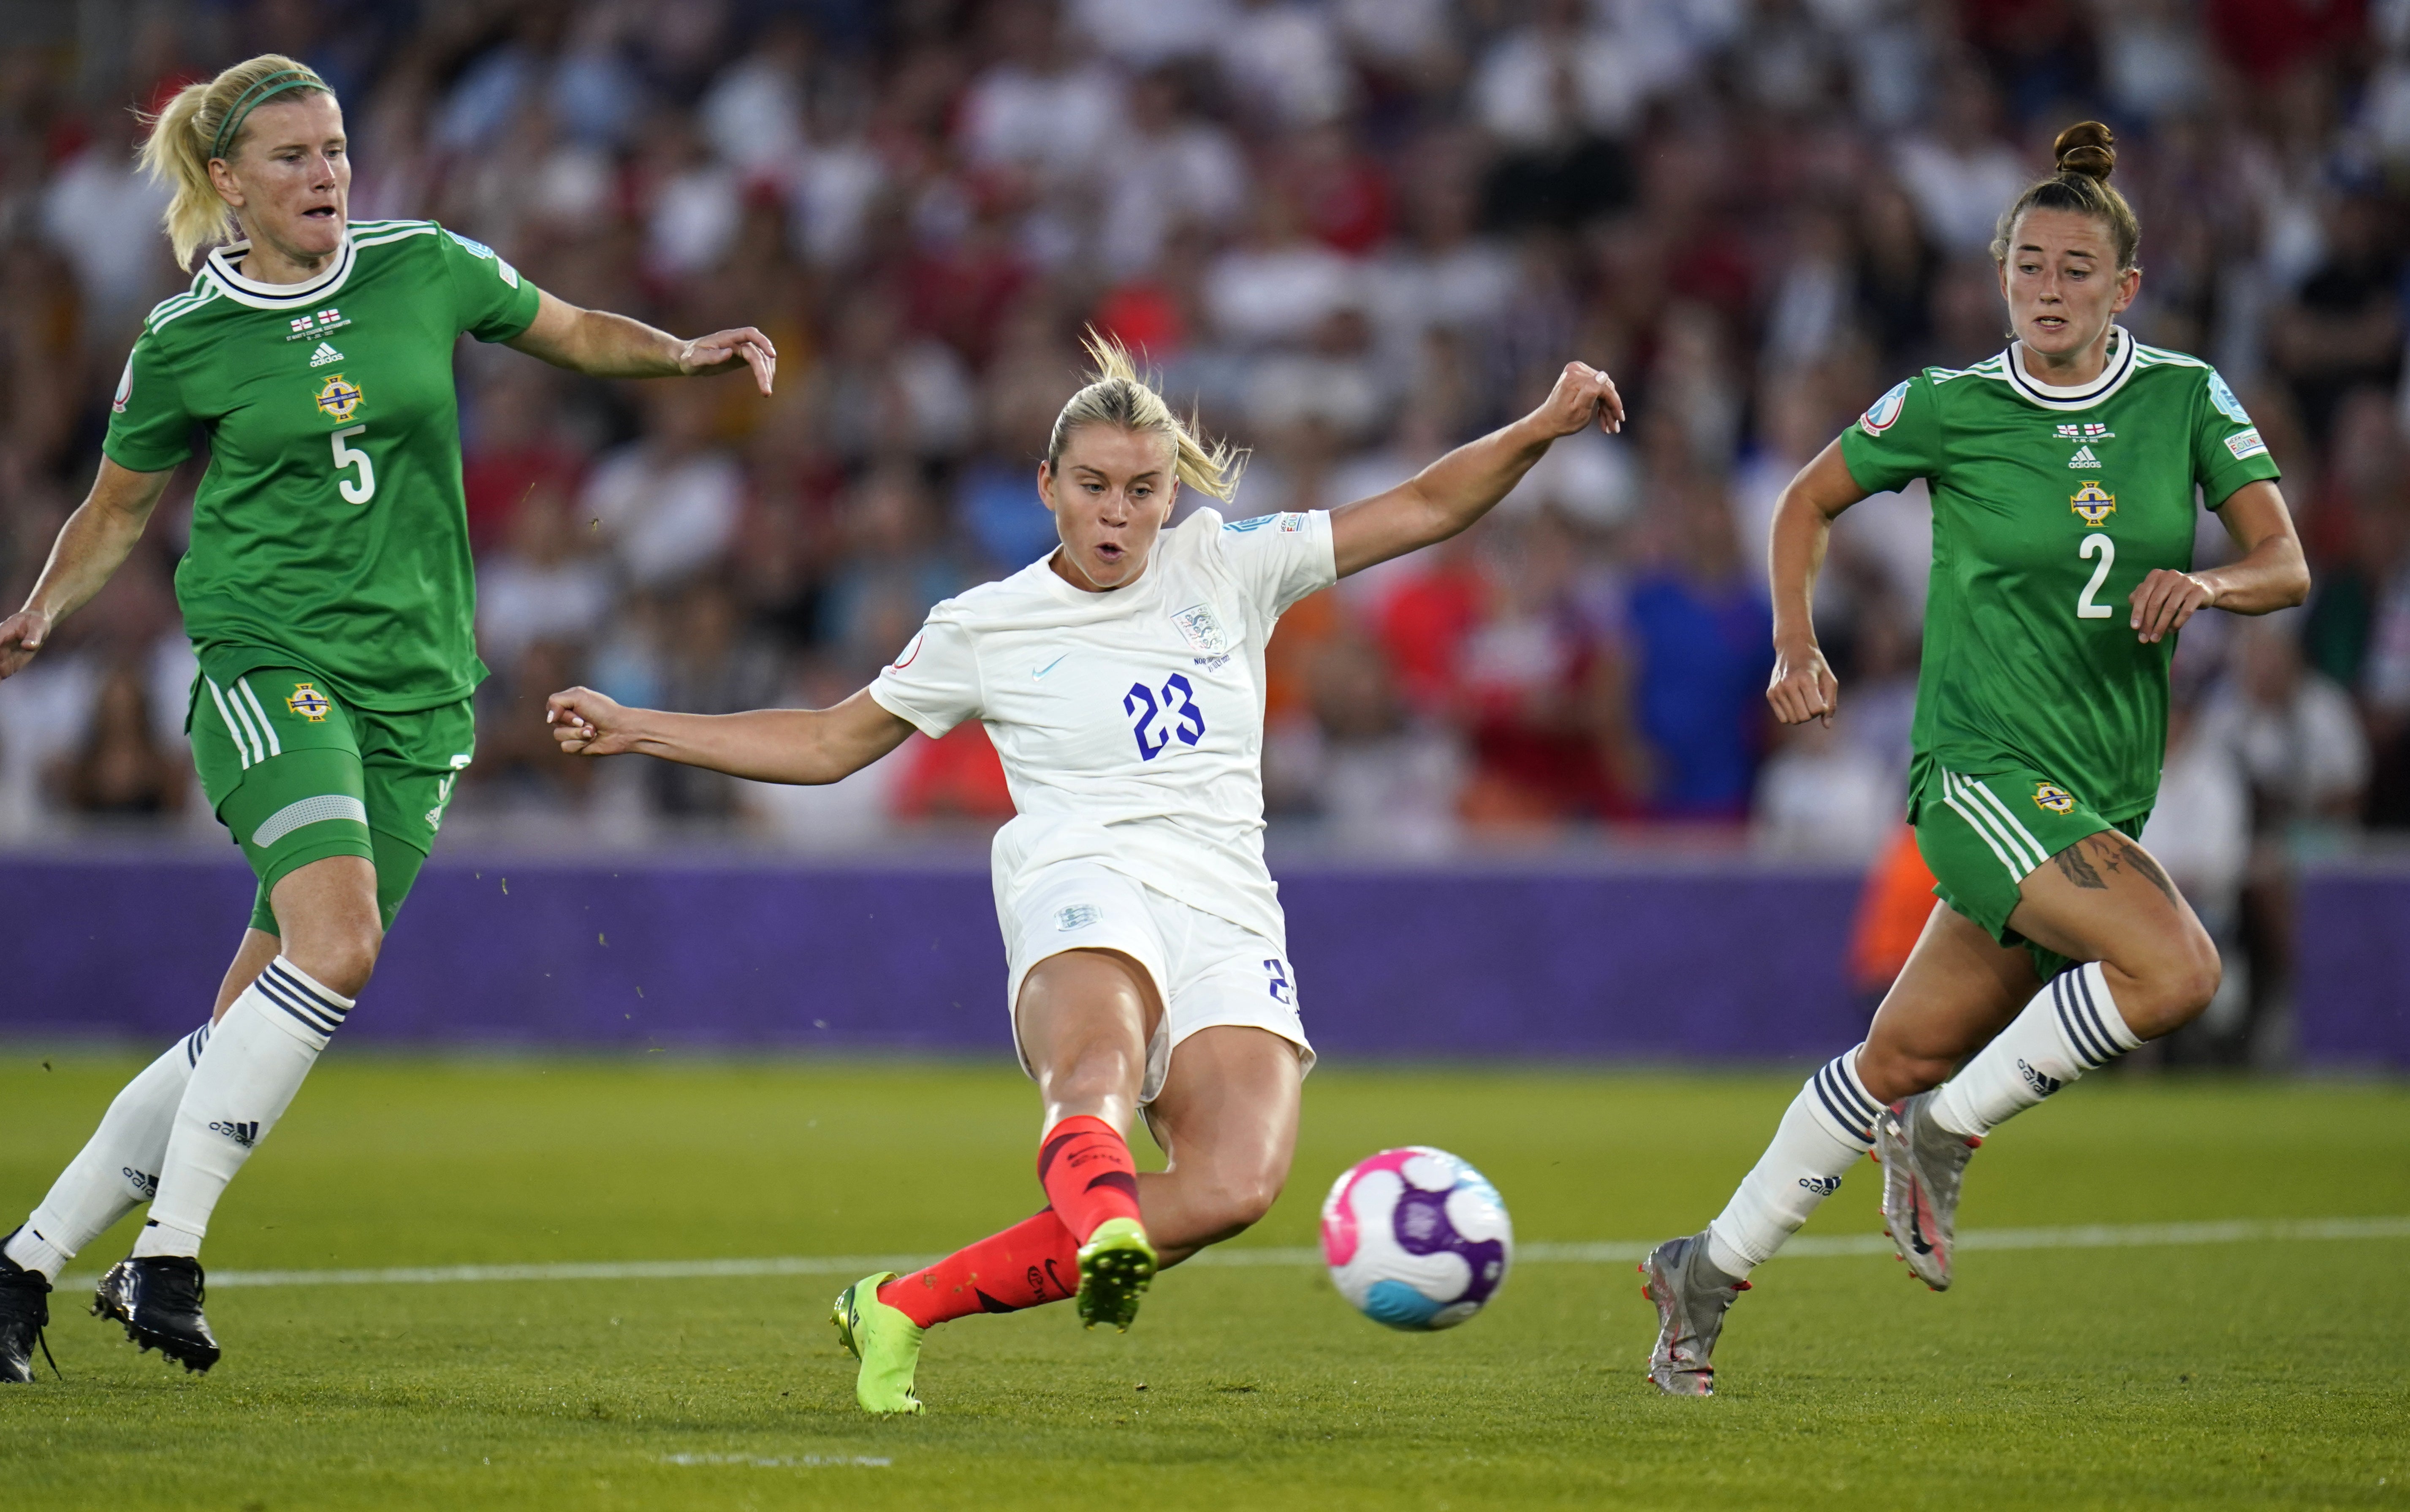 Alessia Russo believes there are a number of areas England need to improve on ahead of their Euro 2022 quarter-final (Andrew Matthews/PA)